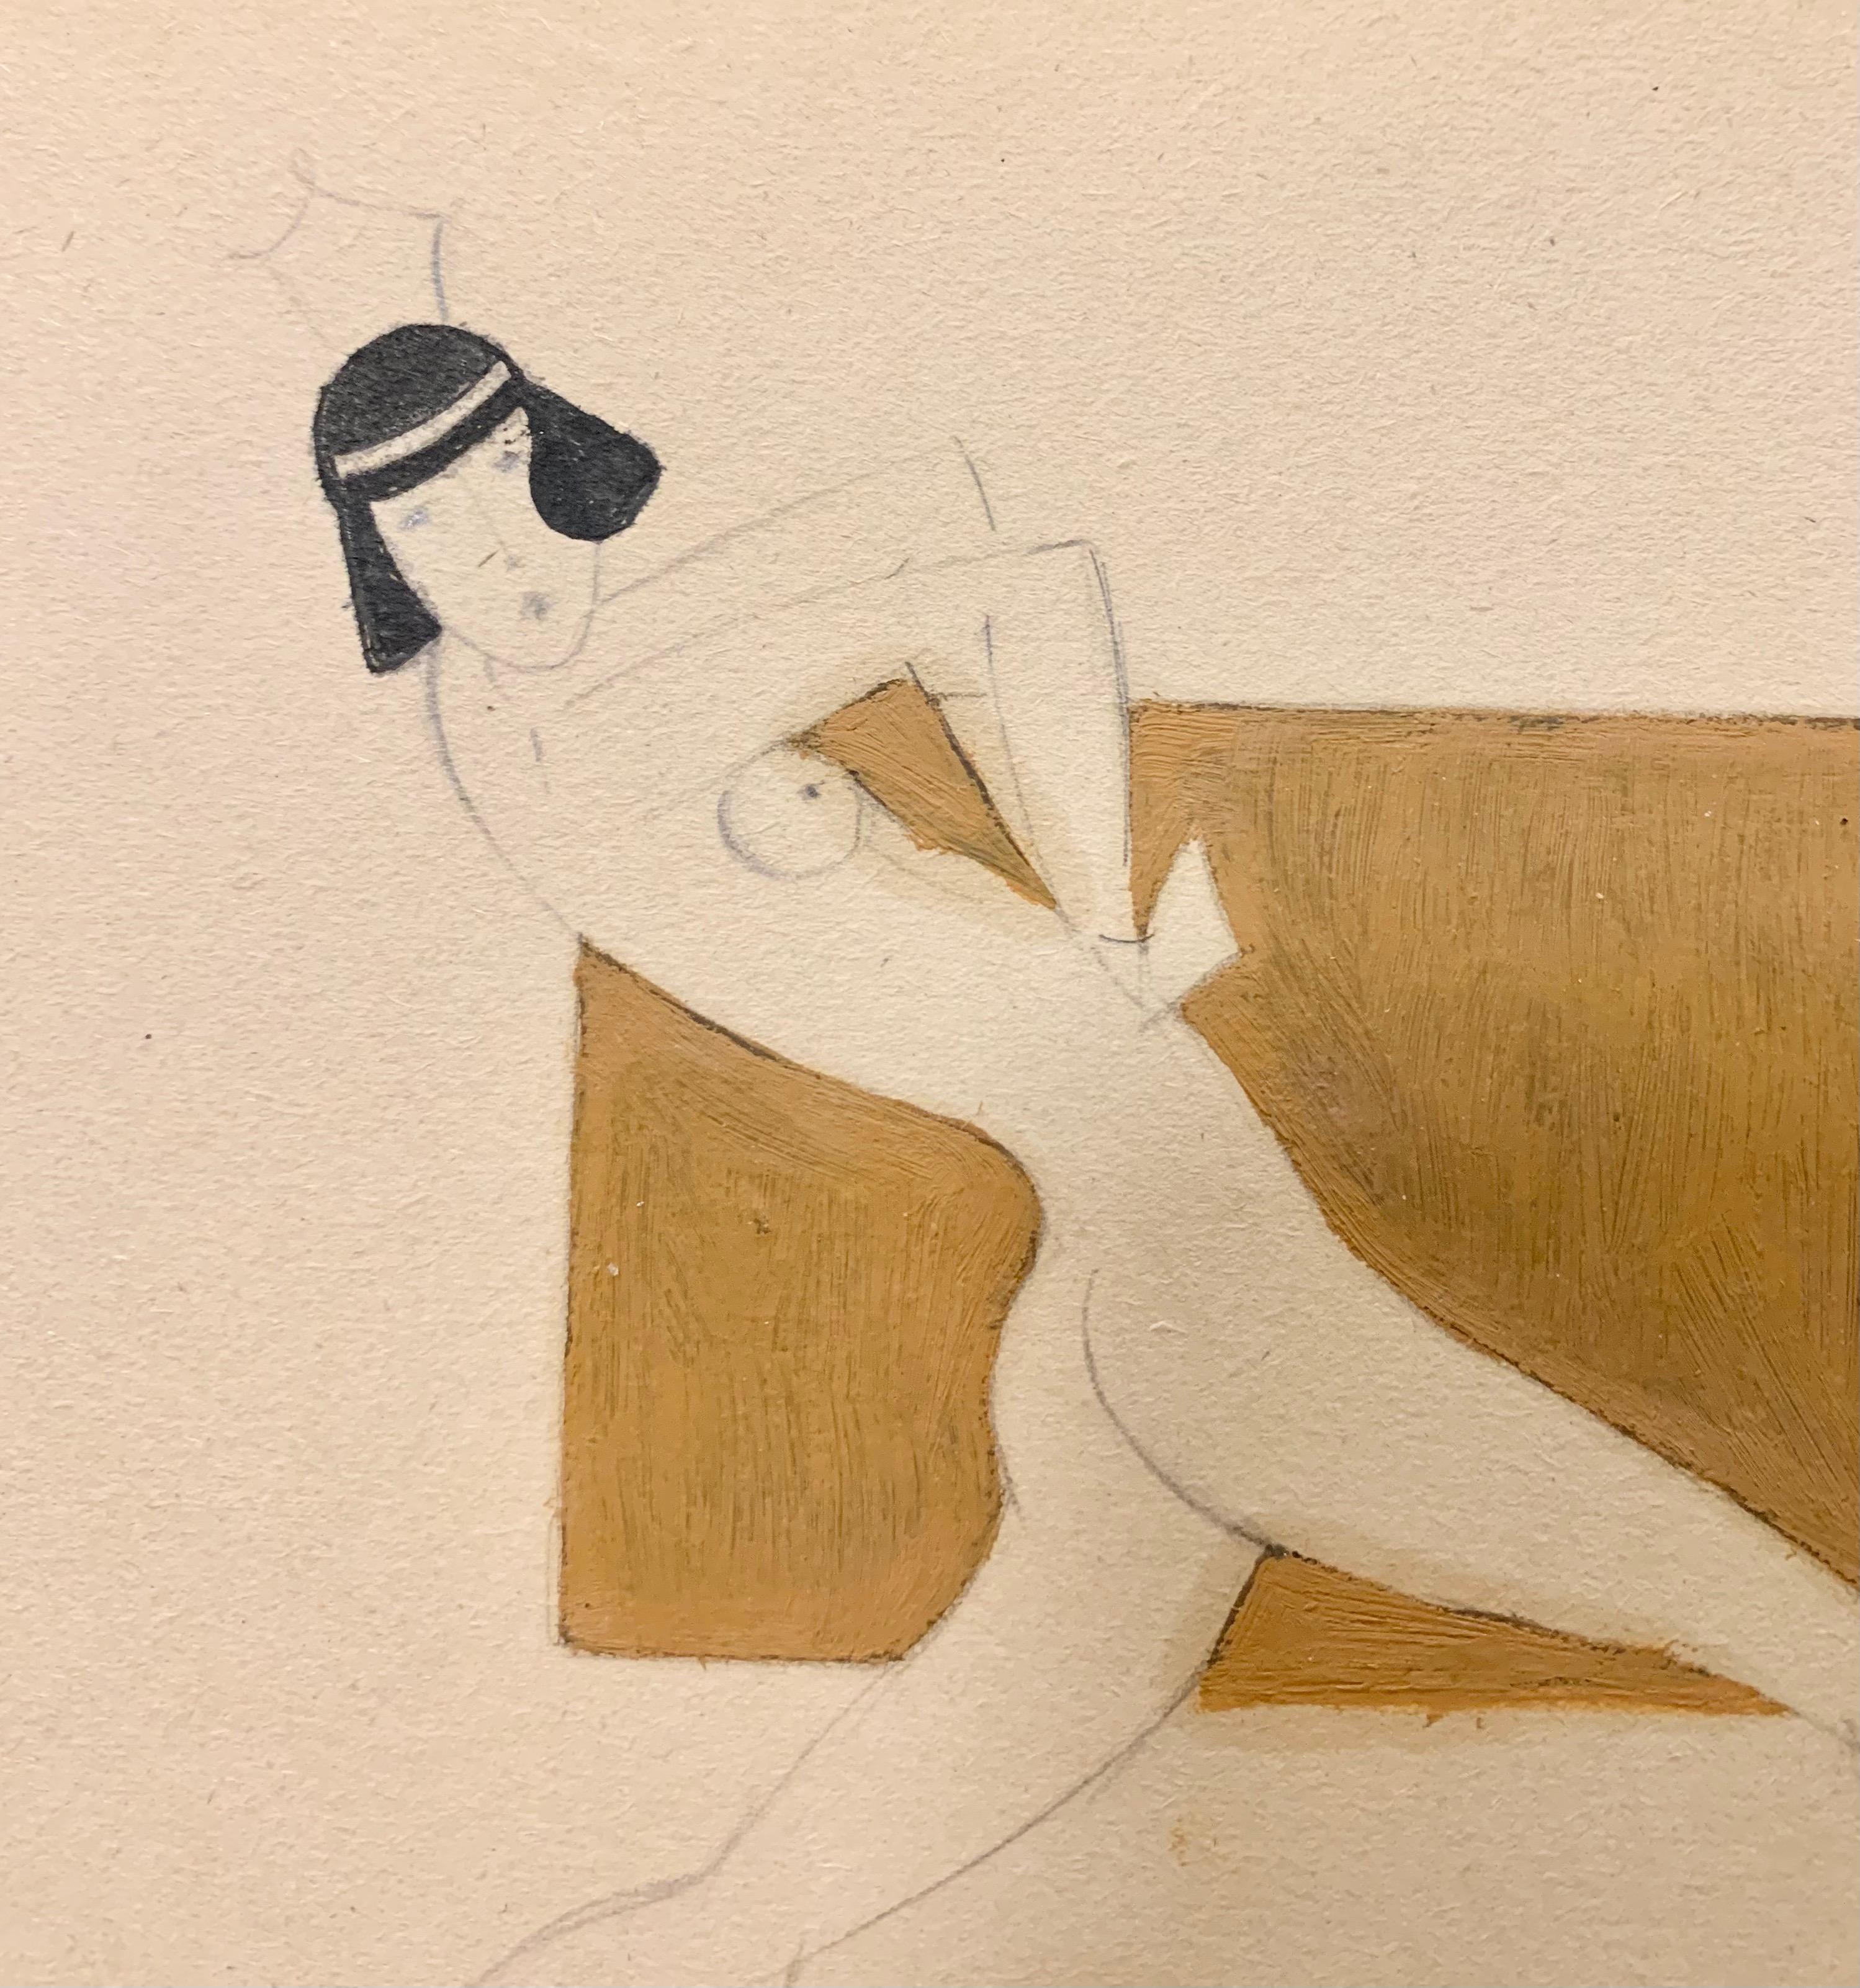 Futurist,1930,Dance,Nude,Deco


Ugo Pozzo was born in Turin on 5 July 1900. From 1919 to 1921 he began to exhibit the first Futurist paintings with Tullio Alpinolo Bracci and Luigi Colombo (Fillia). These are almost clandestine exhibitions held in